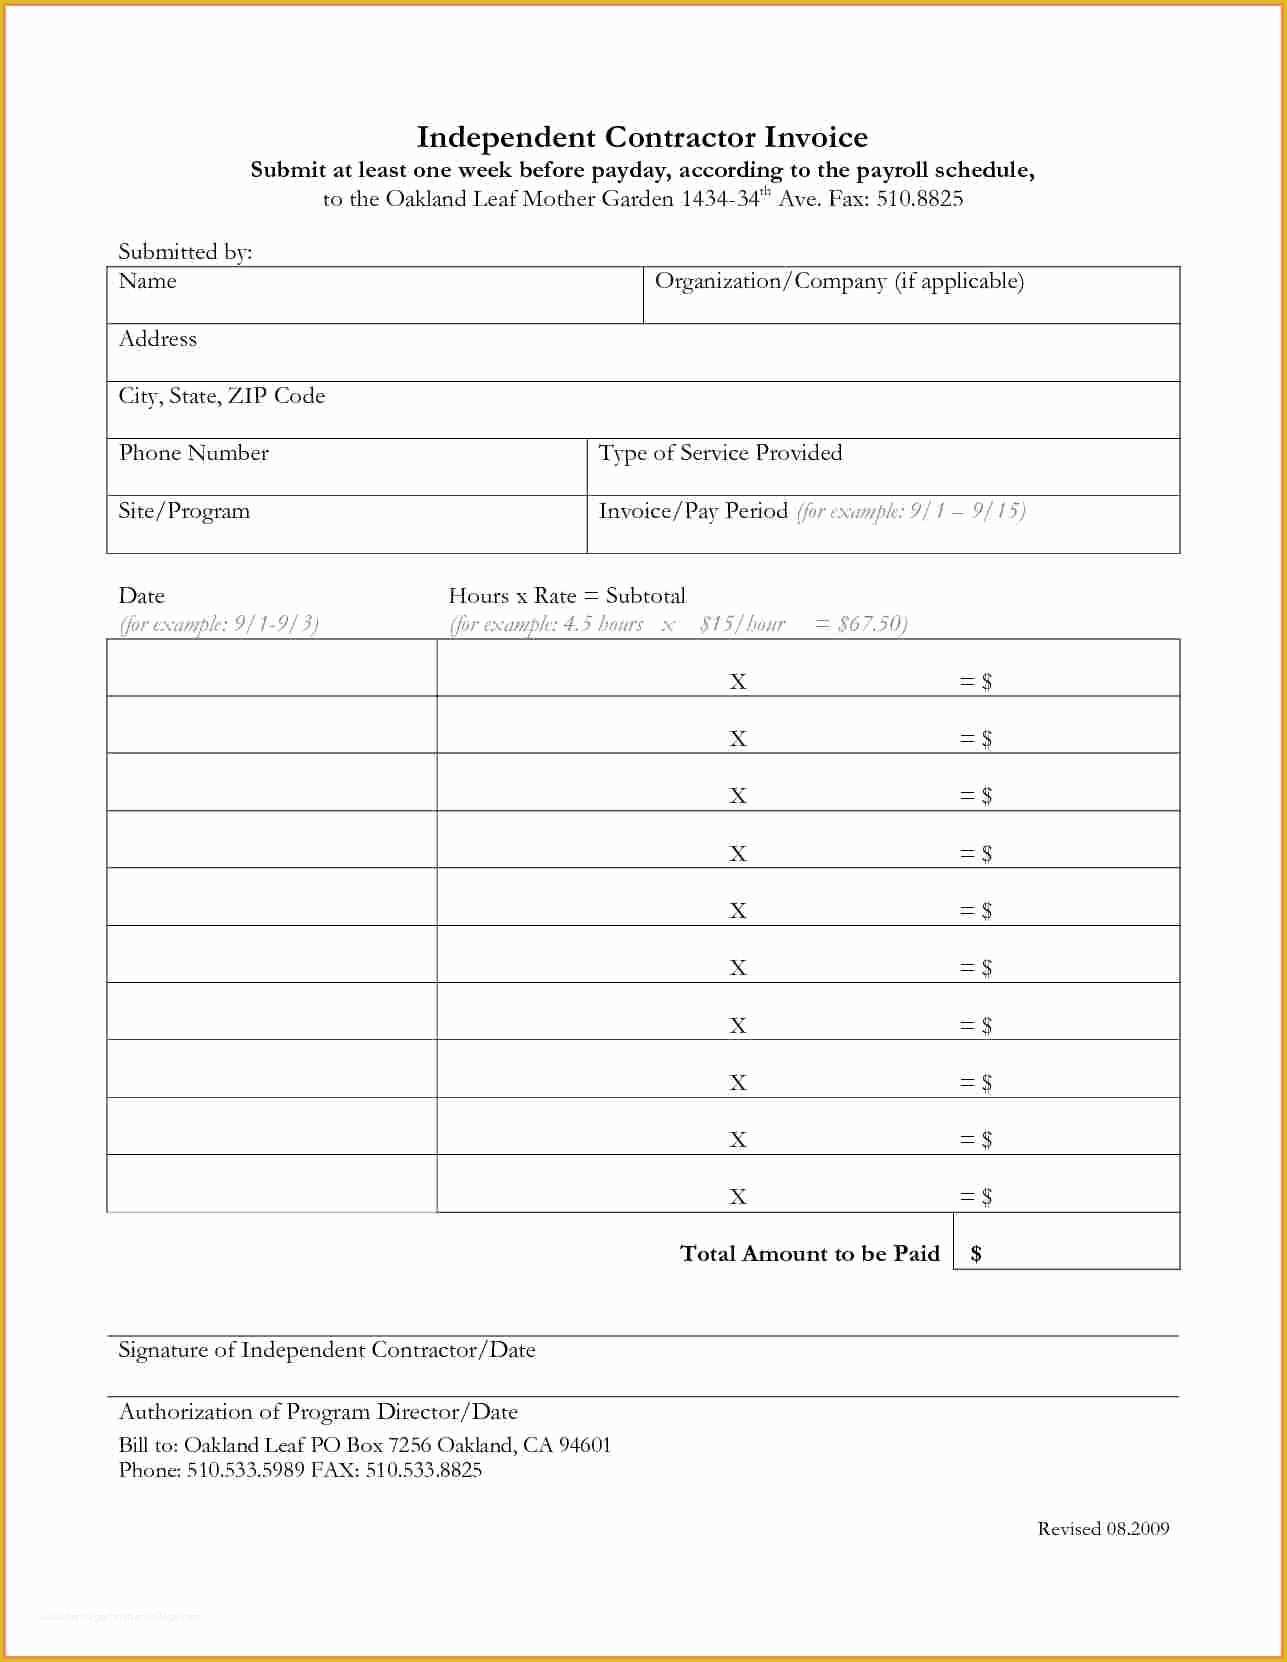 Independent Contractor Invoice Template Free Of 5 Contractor Billing forms